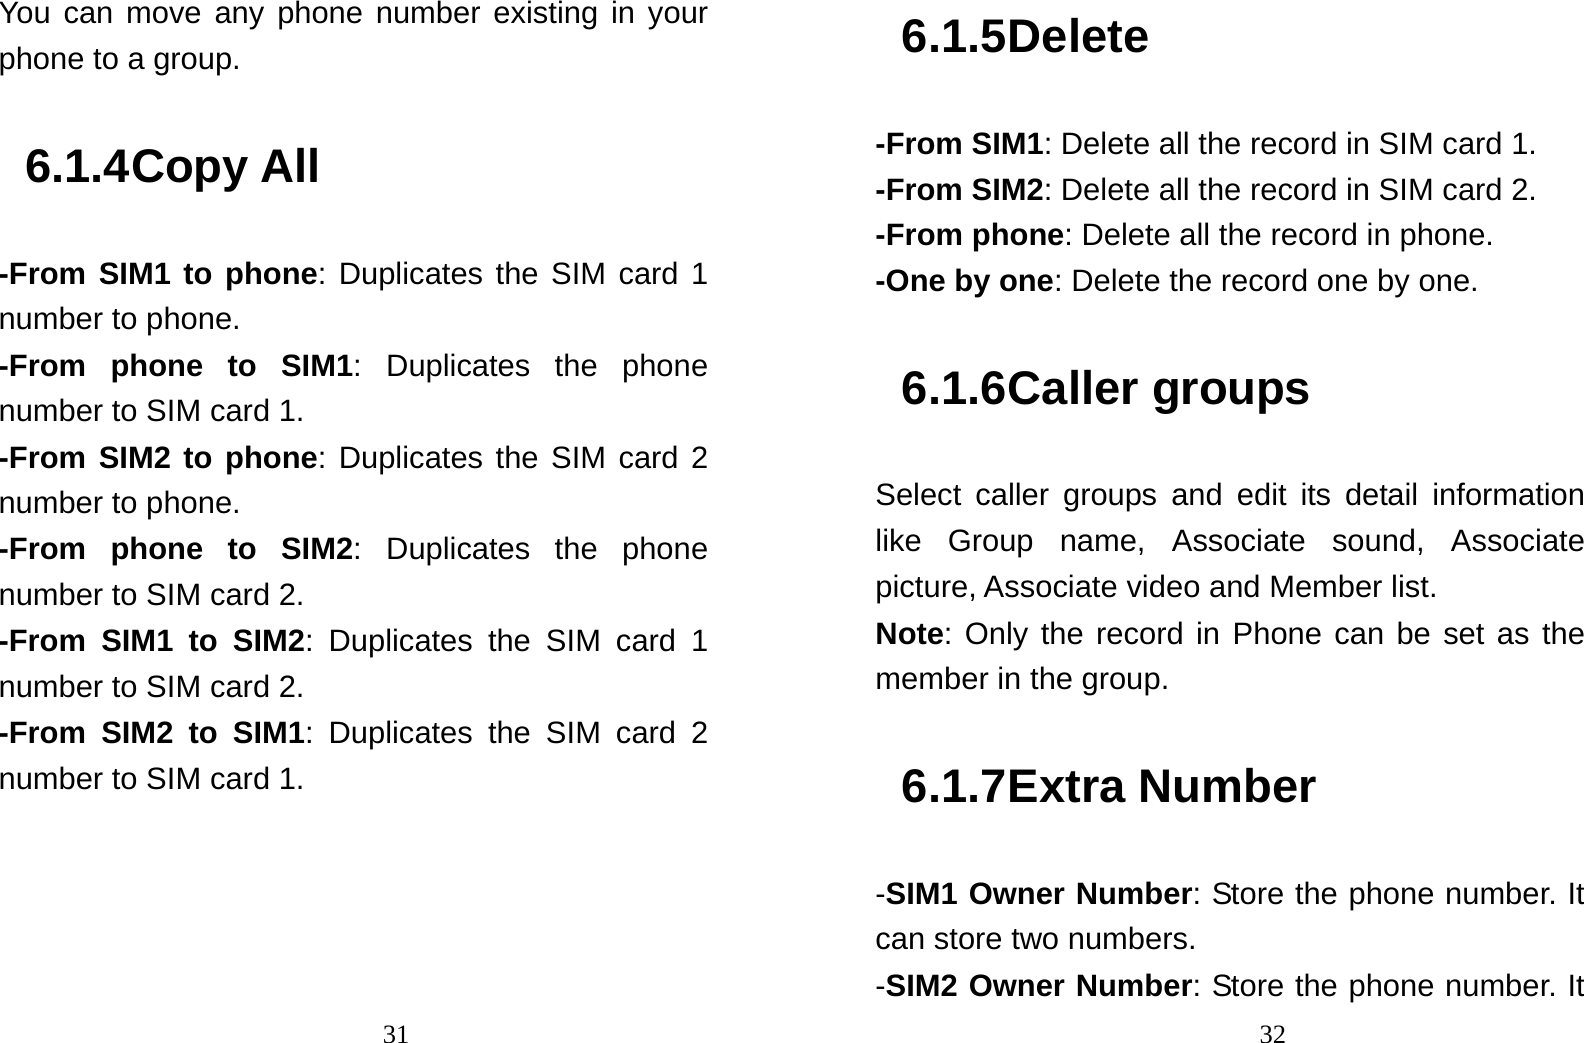                                31You can move any phone number existing in your phone to a group. 6.1.4 Copy All -From SIM1 to phone: Duplicates the SIM card 1 number to phone. -From phone to SIM1: Duplicates the phone number to SIM card 1. -From SIM2 to phone: Duplicates the SIM card 2 number to phone. -From phone to SIM2: Duplicates the phone number to SIM card 2. -From SIM1 to SIM2: Duplicates the SIM card 1 number to SIM card 2. -From SIM2 to SIM1: Duplicates the SIM card 2 number to SIM card 1.                                326.1.5 Delete -From SIM1: Delete all the record in SIM card 1. -From SIM2: Delete all the record in SIM card 2. -From phone: Delete all the record in phone. -One by one: Delete the record one by one.   6.1.6 Caller groups Select caller groups and edit its detail information like Group name, Associate sound, Associate picture, Associate video and Member list. Note: Only the record in Phone can be set as the member in the group.   6.1.7 Extra Number -SIM1 Owner Number: Store the phone number. It can store two numbers. -SIM2 Owner Number: Store the phone number. It 